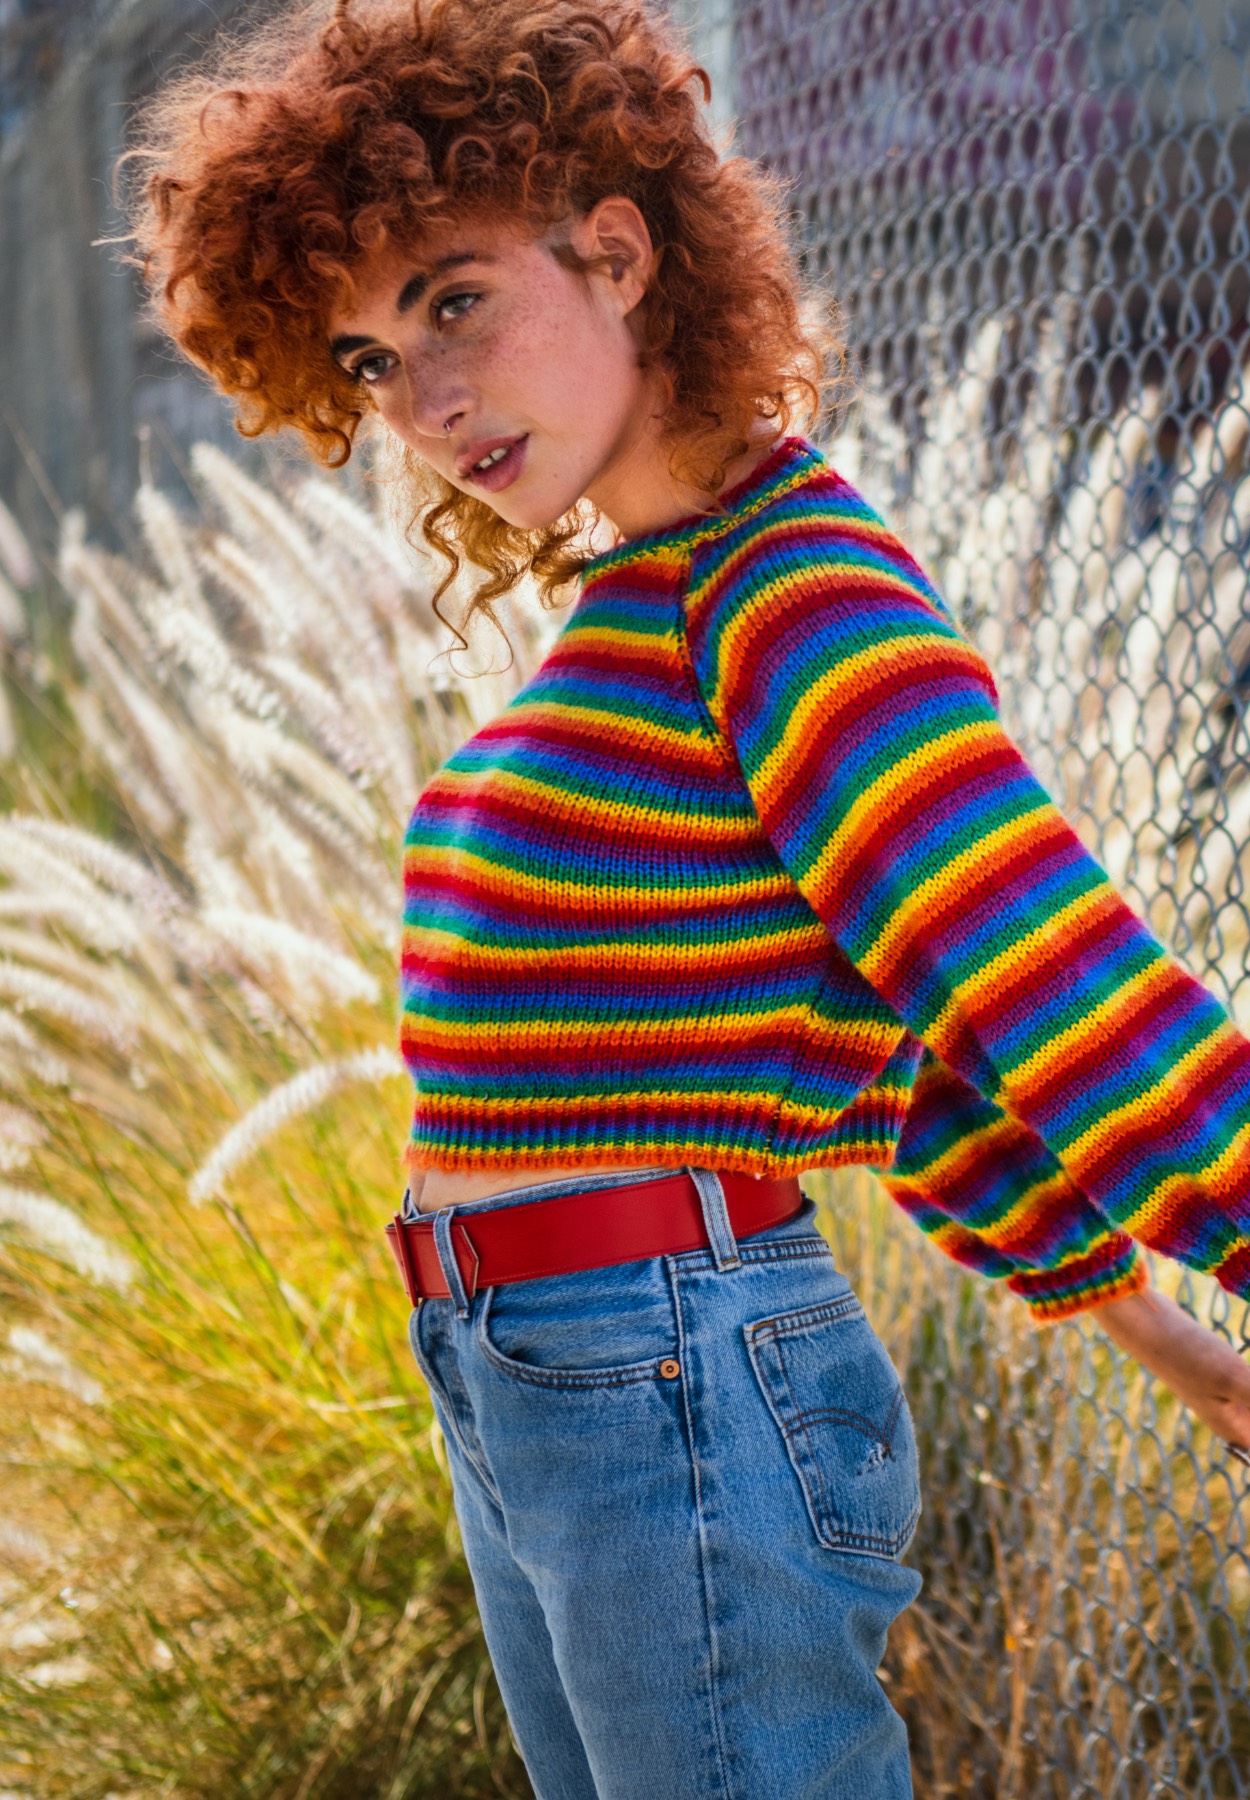 Small image of woman standing with rainbow sweater